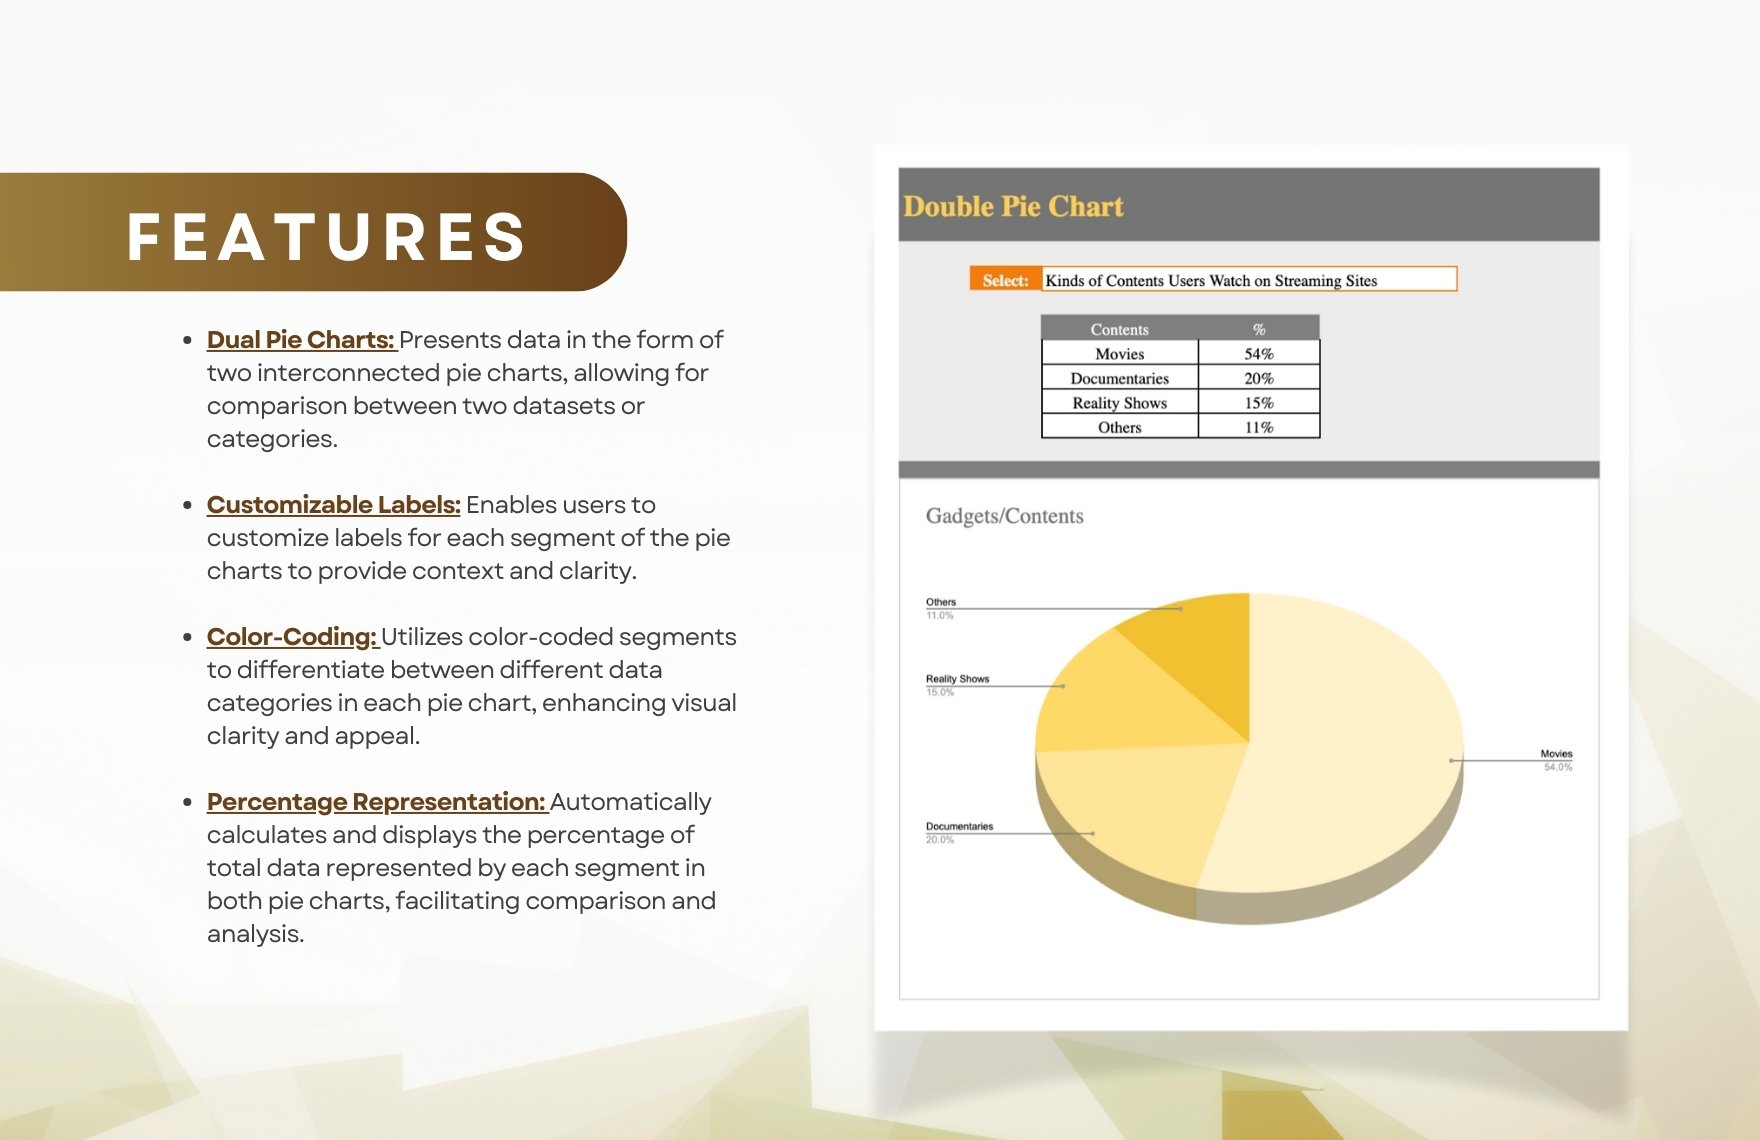 Double Pie Chart Template